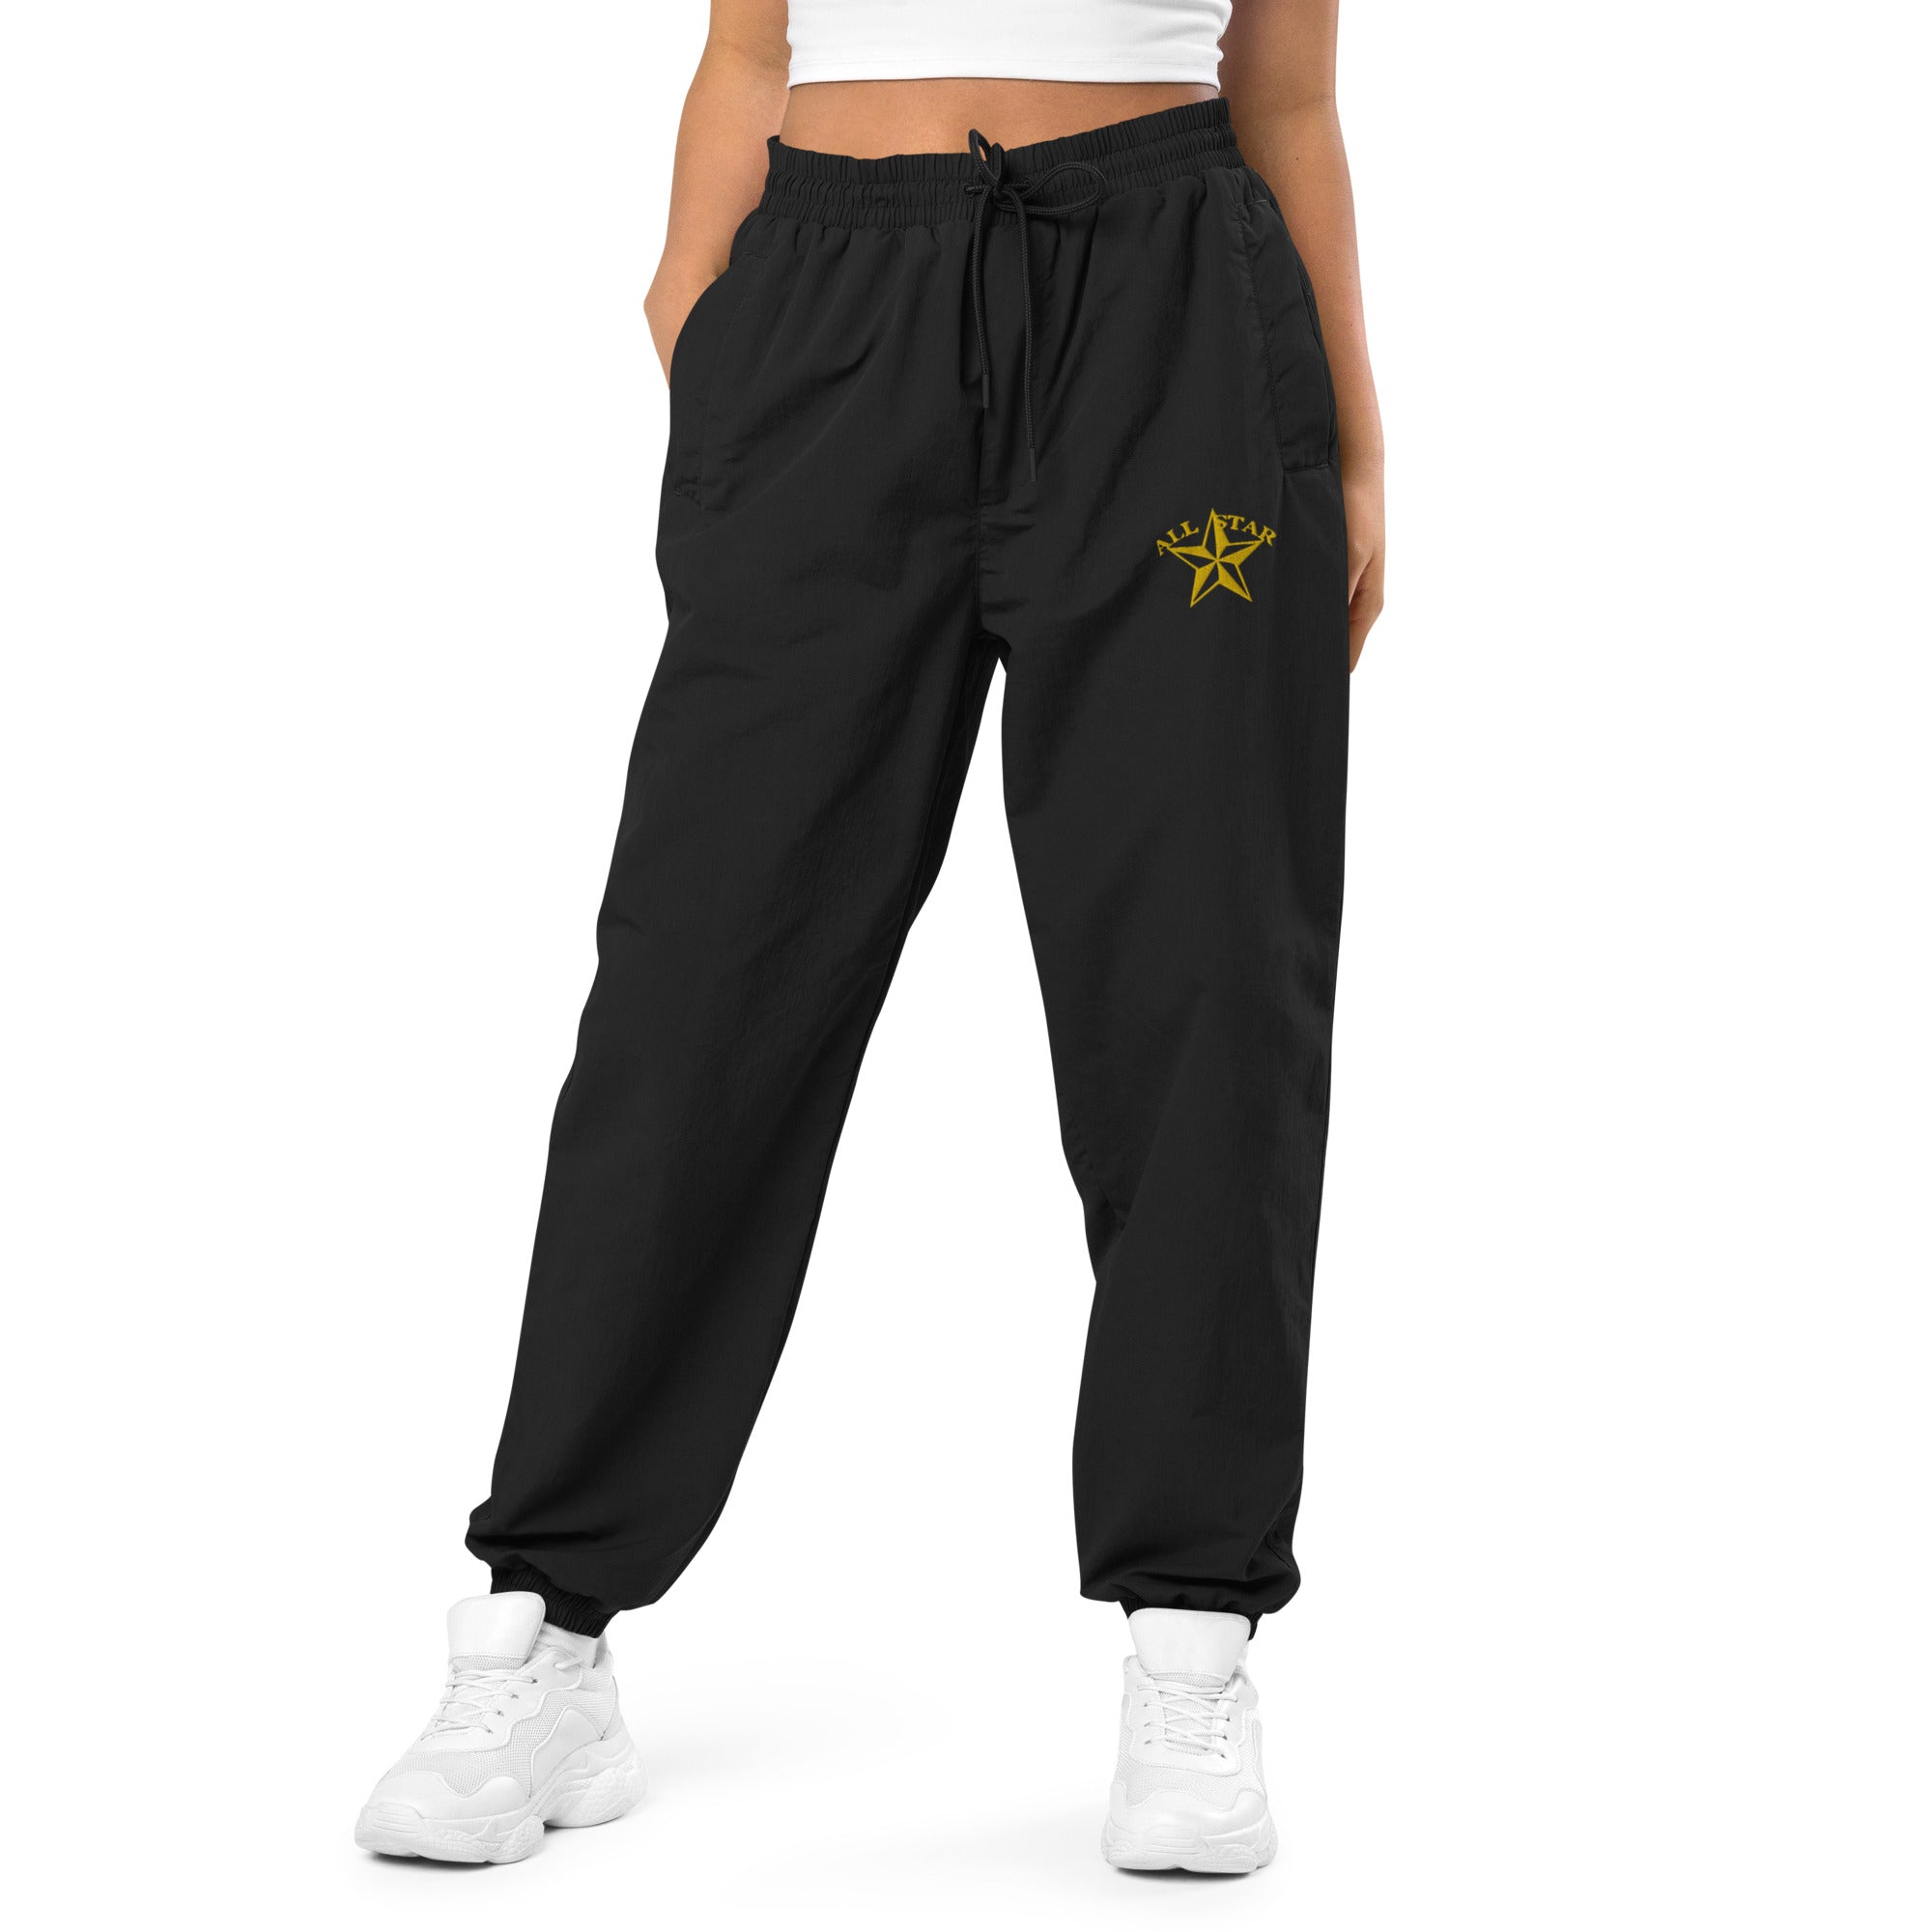 The Best Men's Black Tracksuit Bottoms by Nike. Nike CH